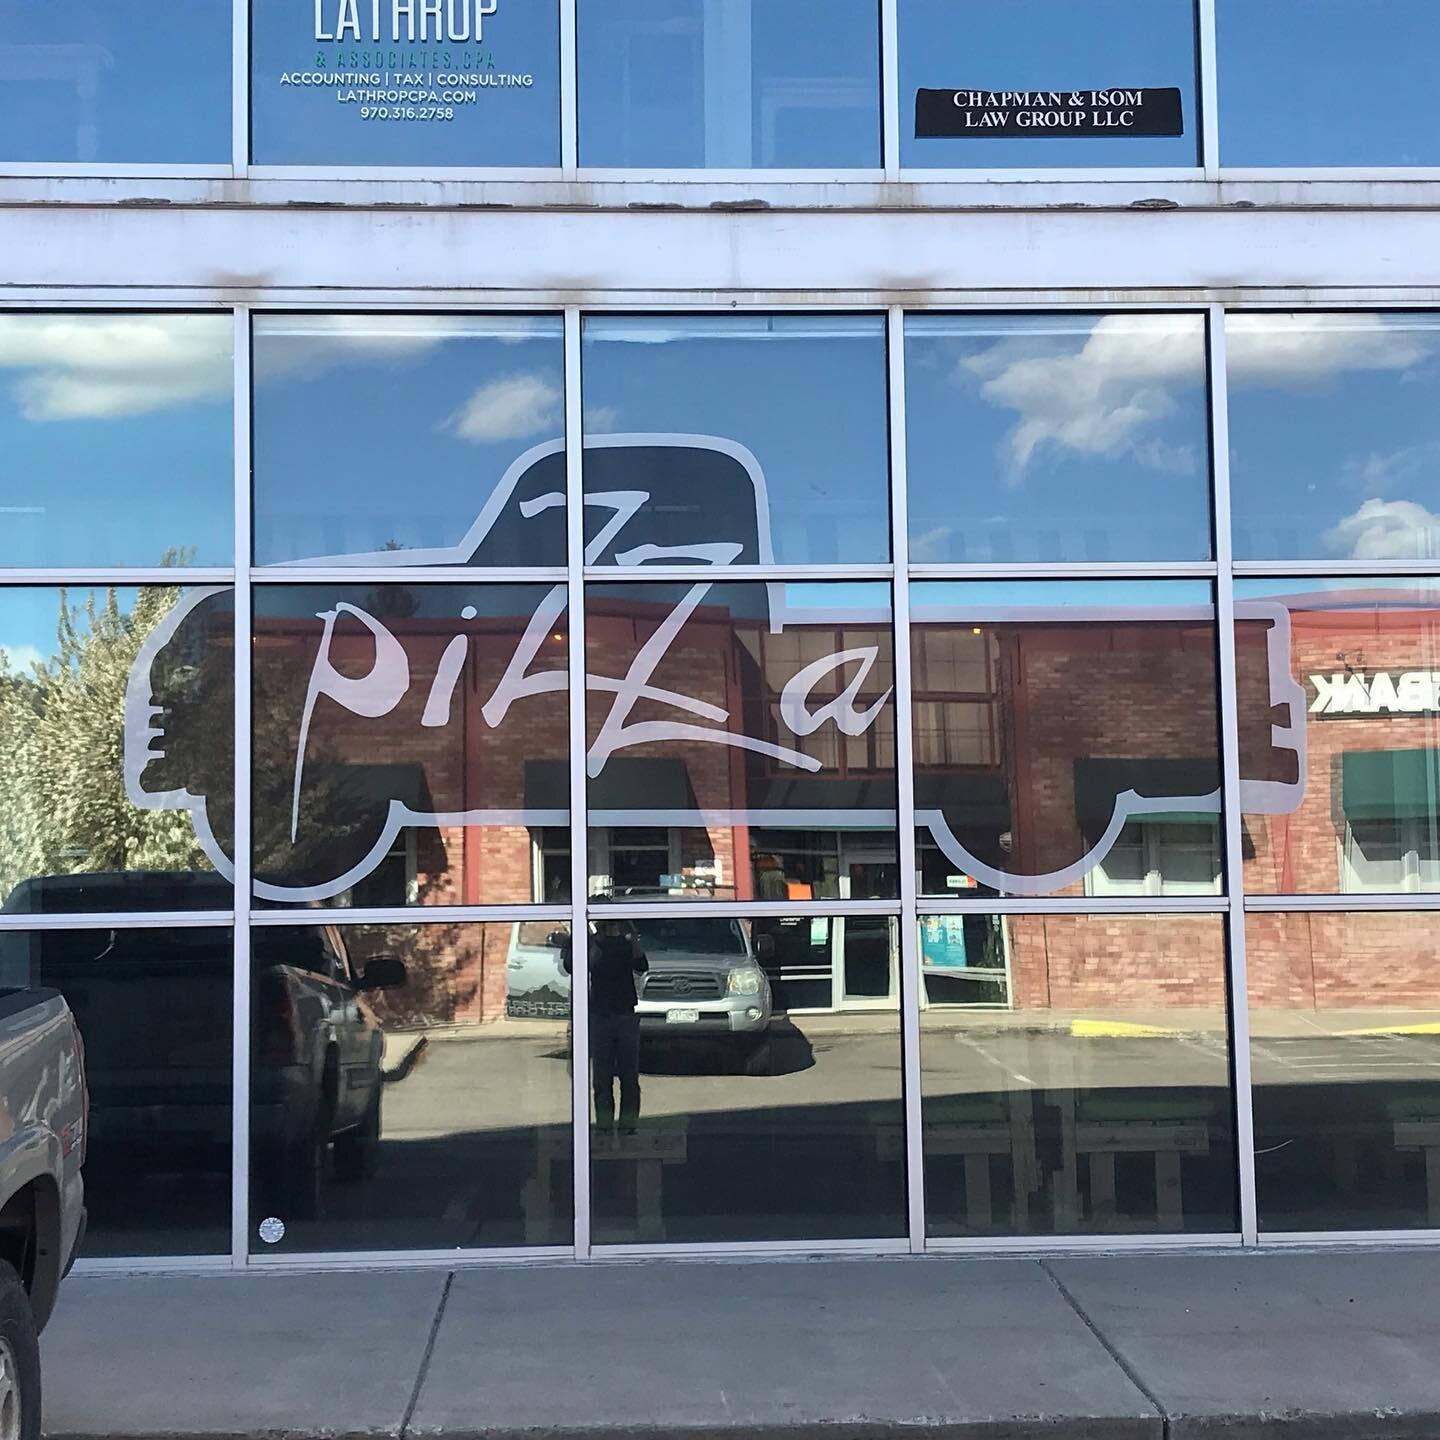 Perforated vinyl window graphics for @pickupspizza in Edwards. Big impact outside with little impact on the view from inside.